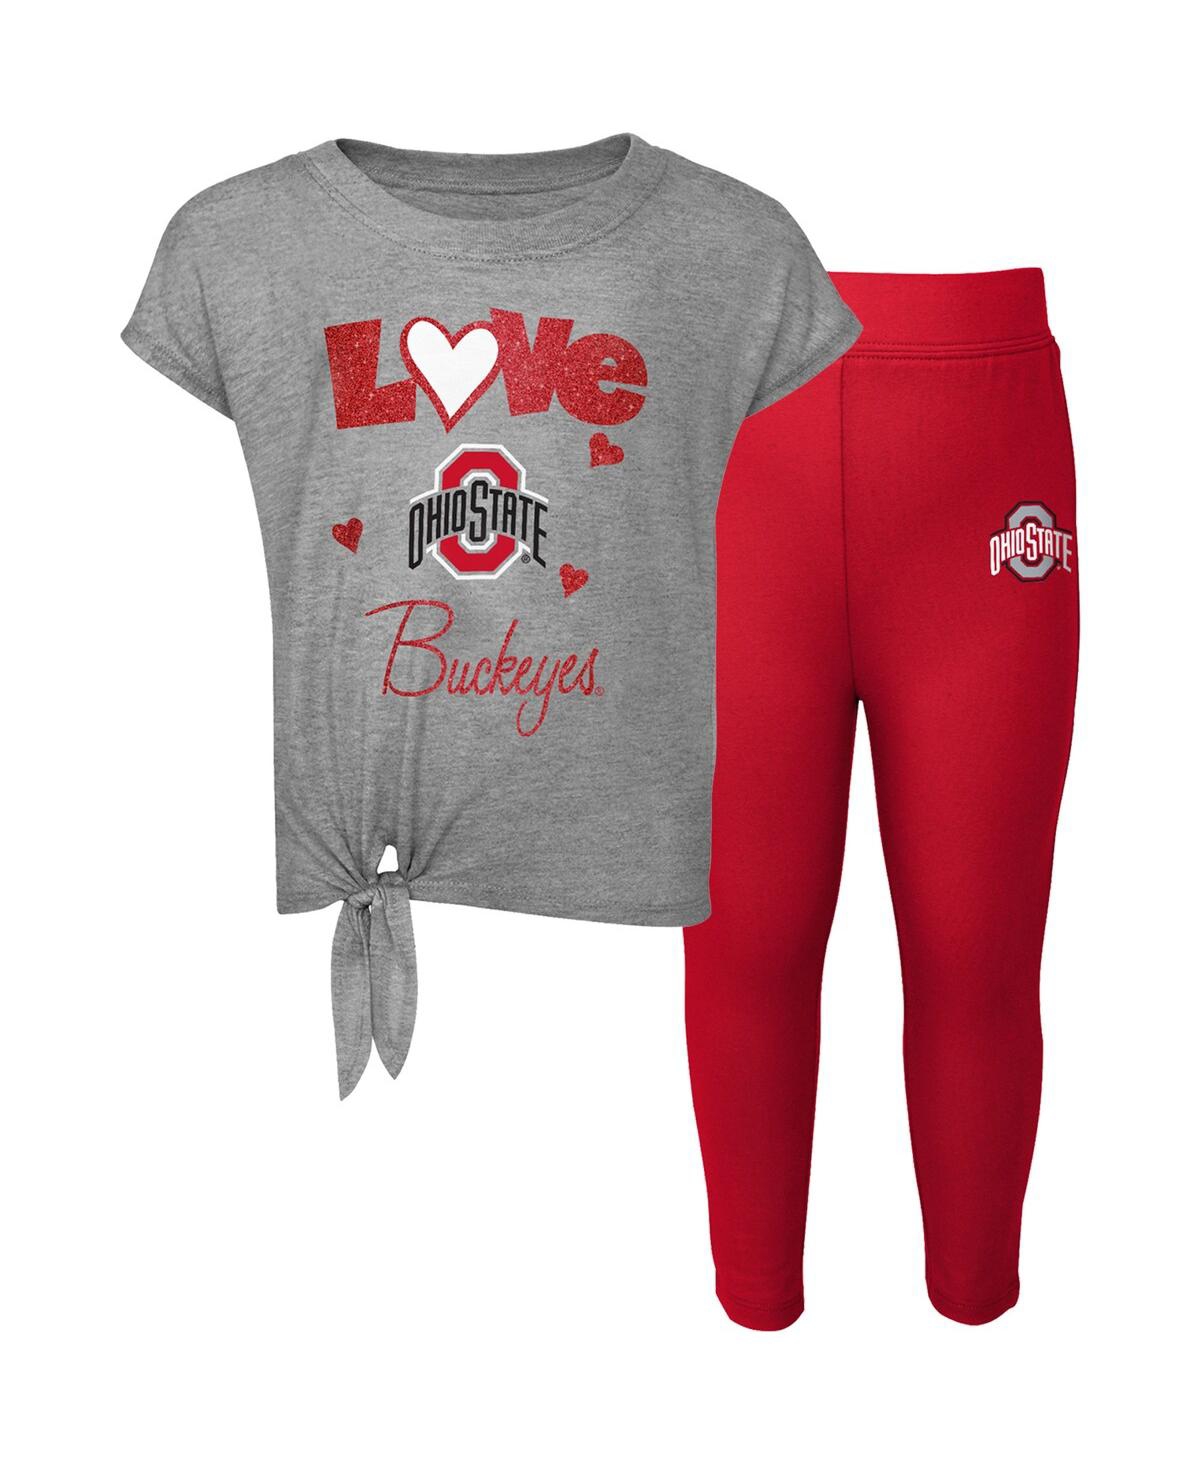 Outerstuff Babies' Preschool And Toddler Boys And Girls Heathered Gray, Scarlet Ohio State Buckeyes Forever Love T-shir In Heathered Gray,scarlet